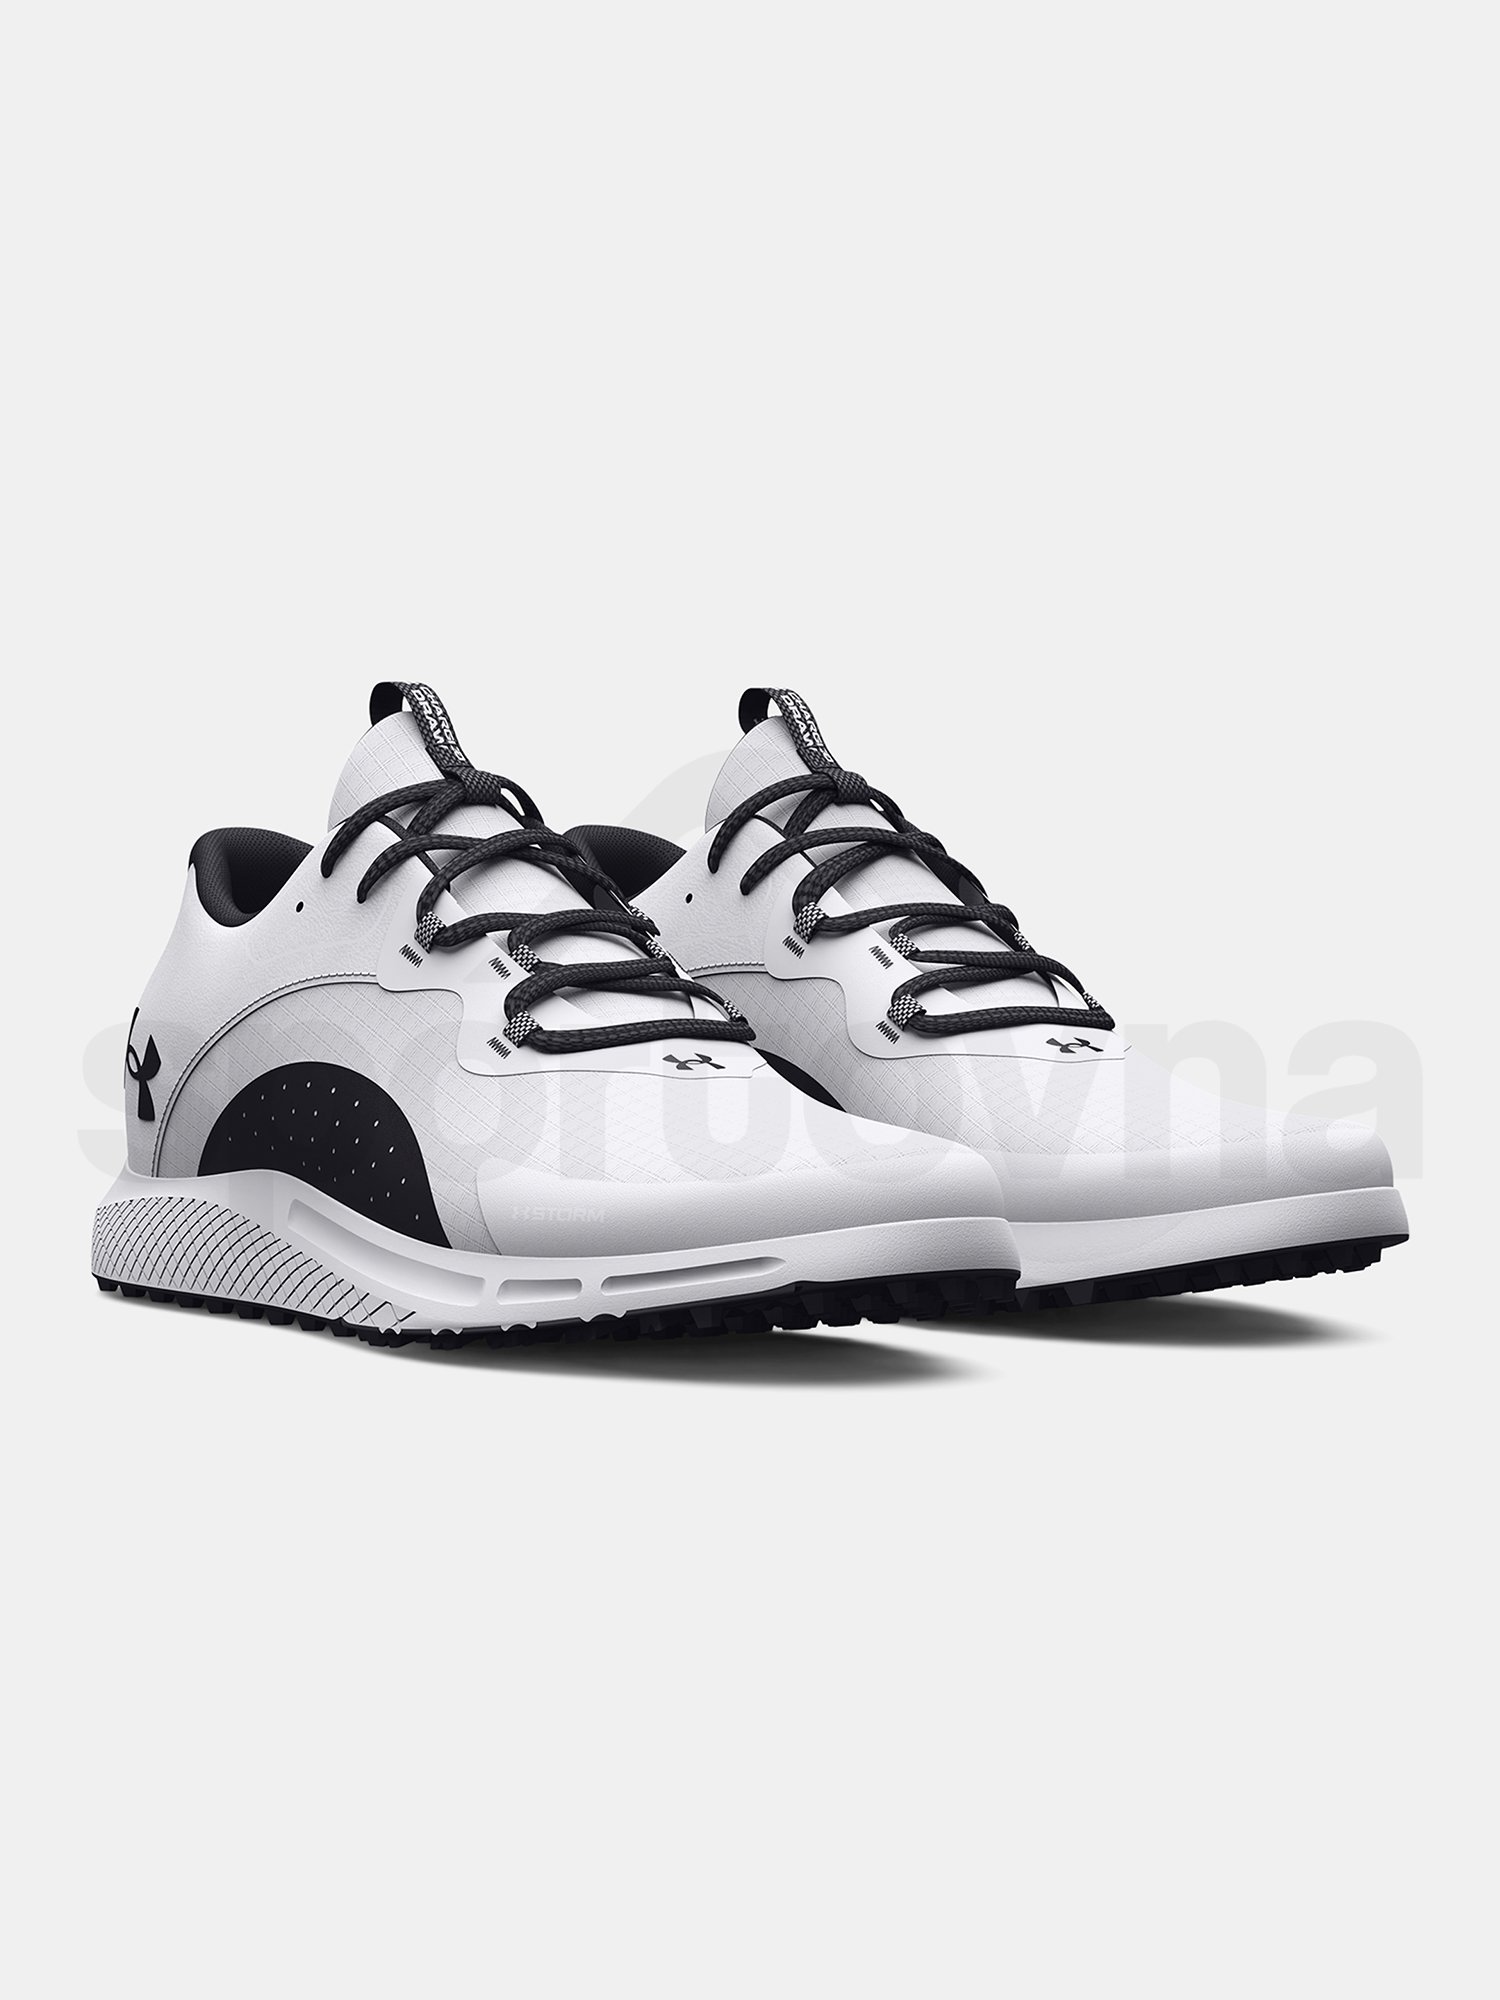 Boty Under Armour UA Charged Draw 2 SL-WHT